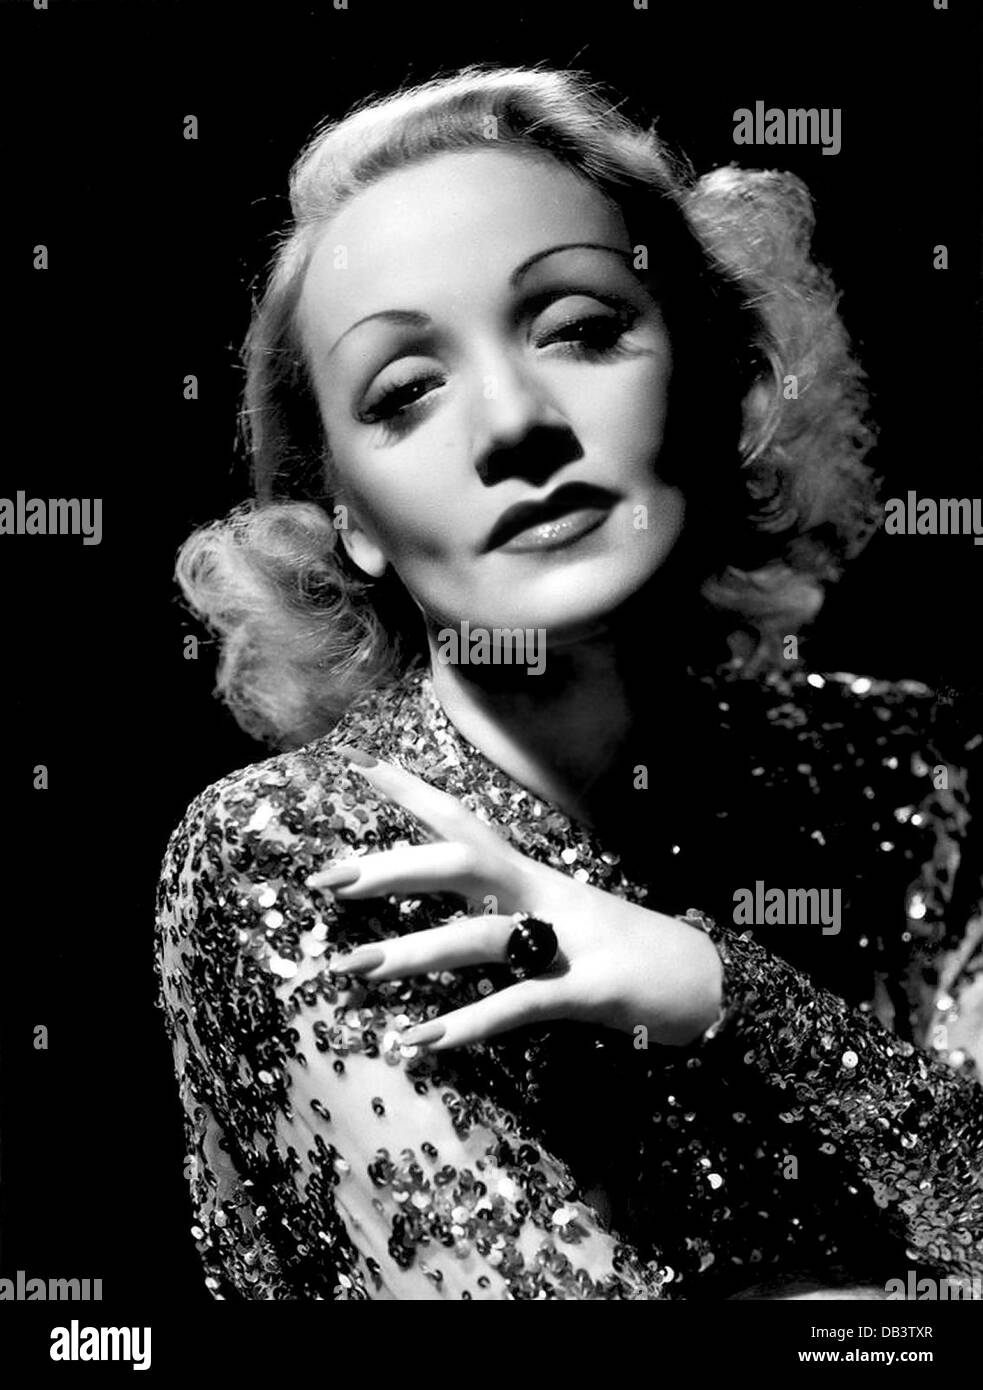 A FOREIGN AFFAIR Paramount, 1948. Directed by Billy Wilder. With Marlene Dietrich Stock Photo